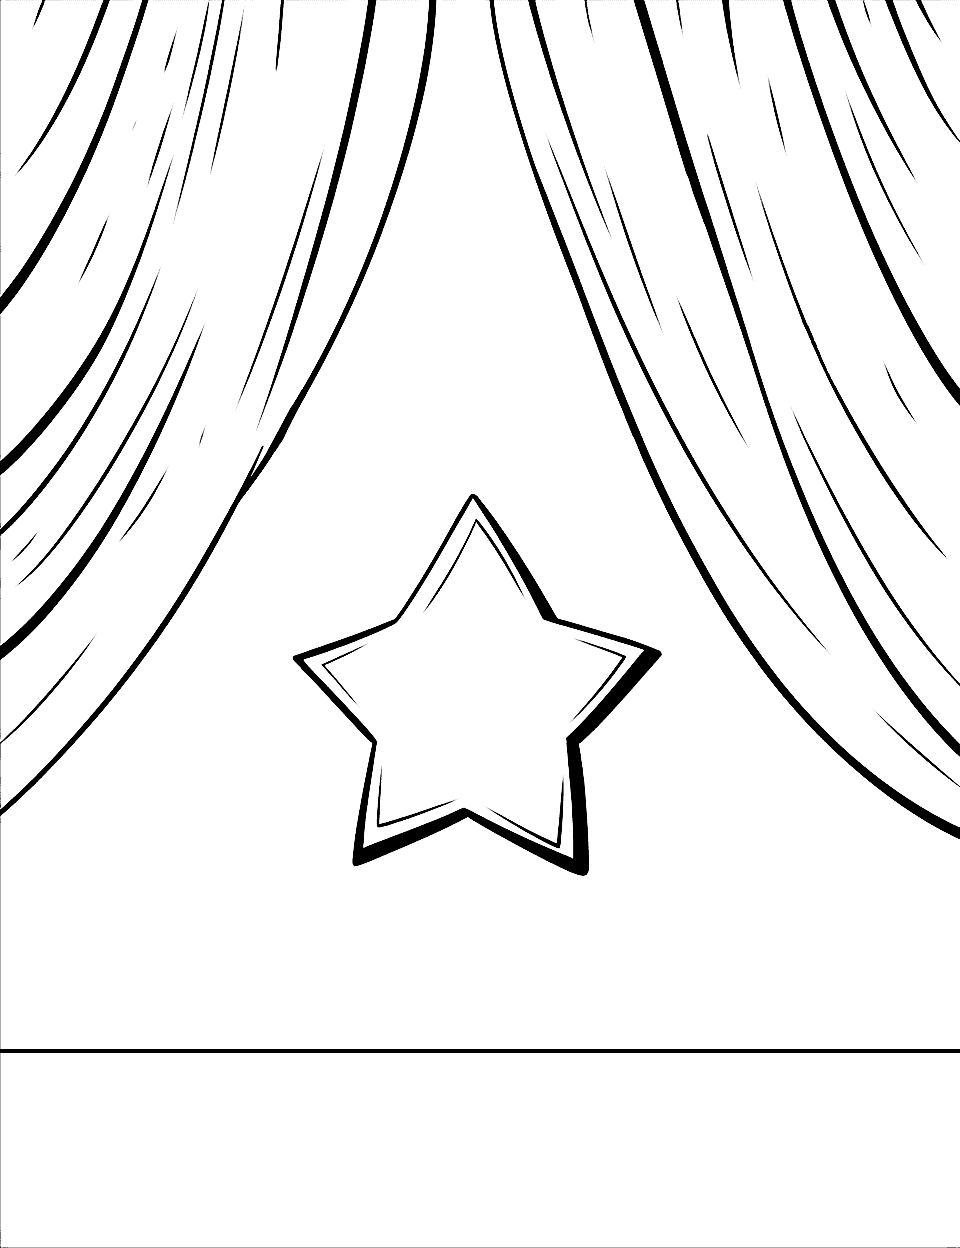 Shining Star Performance Coloring Page - A single, bright star shining down on a stage with curtains.